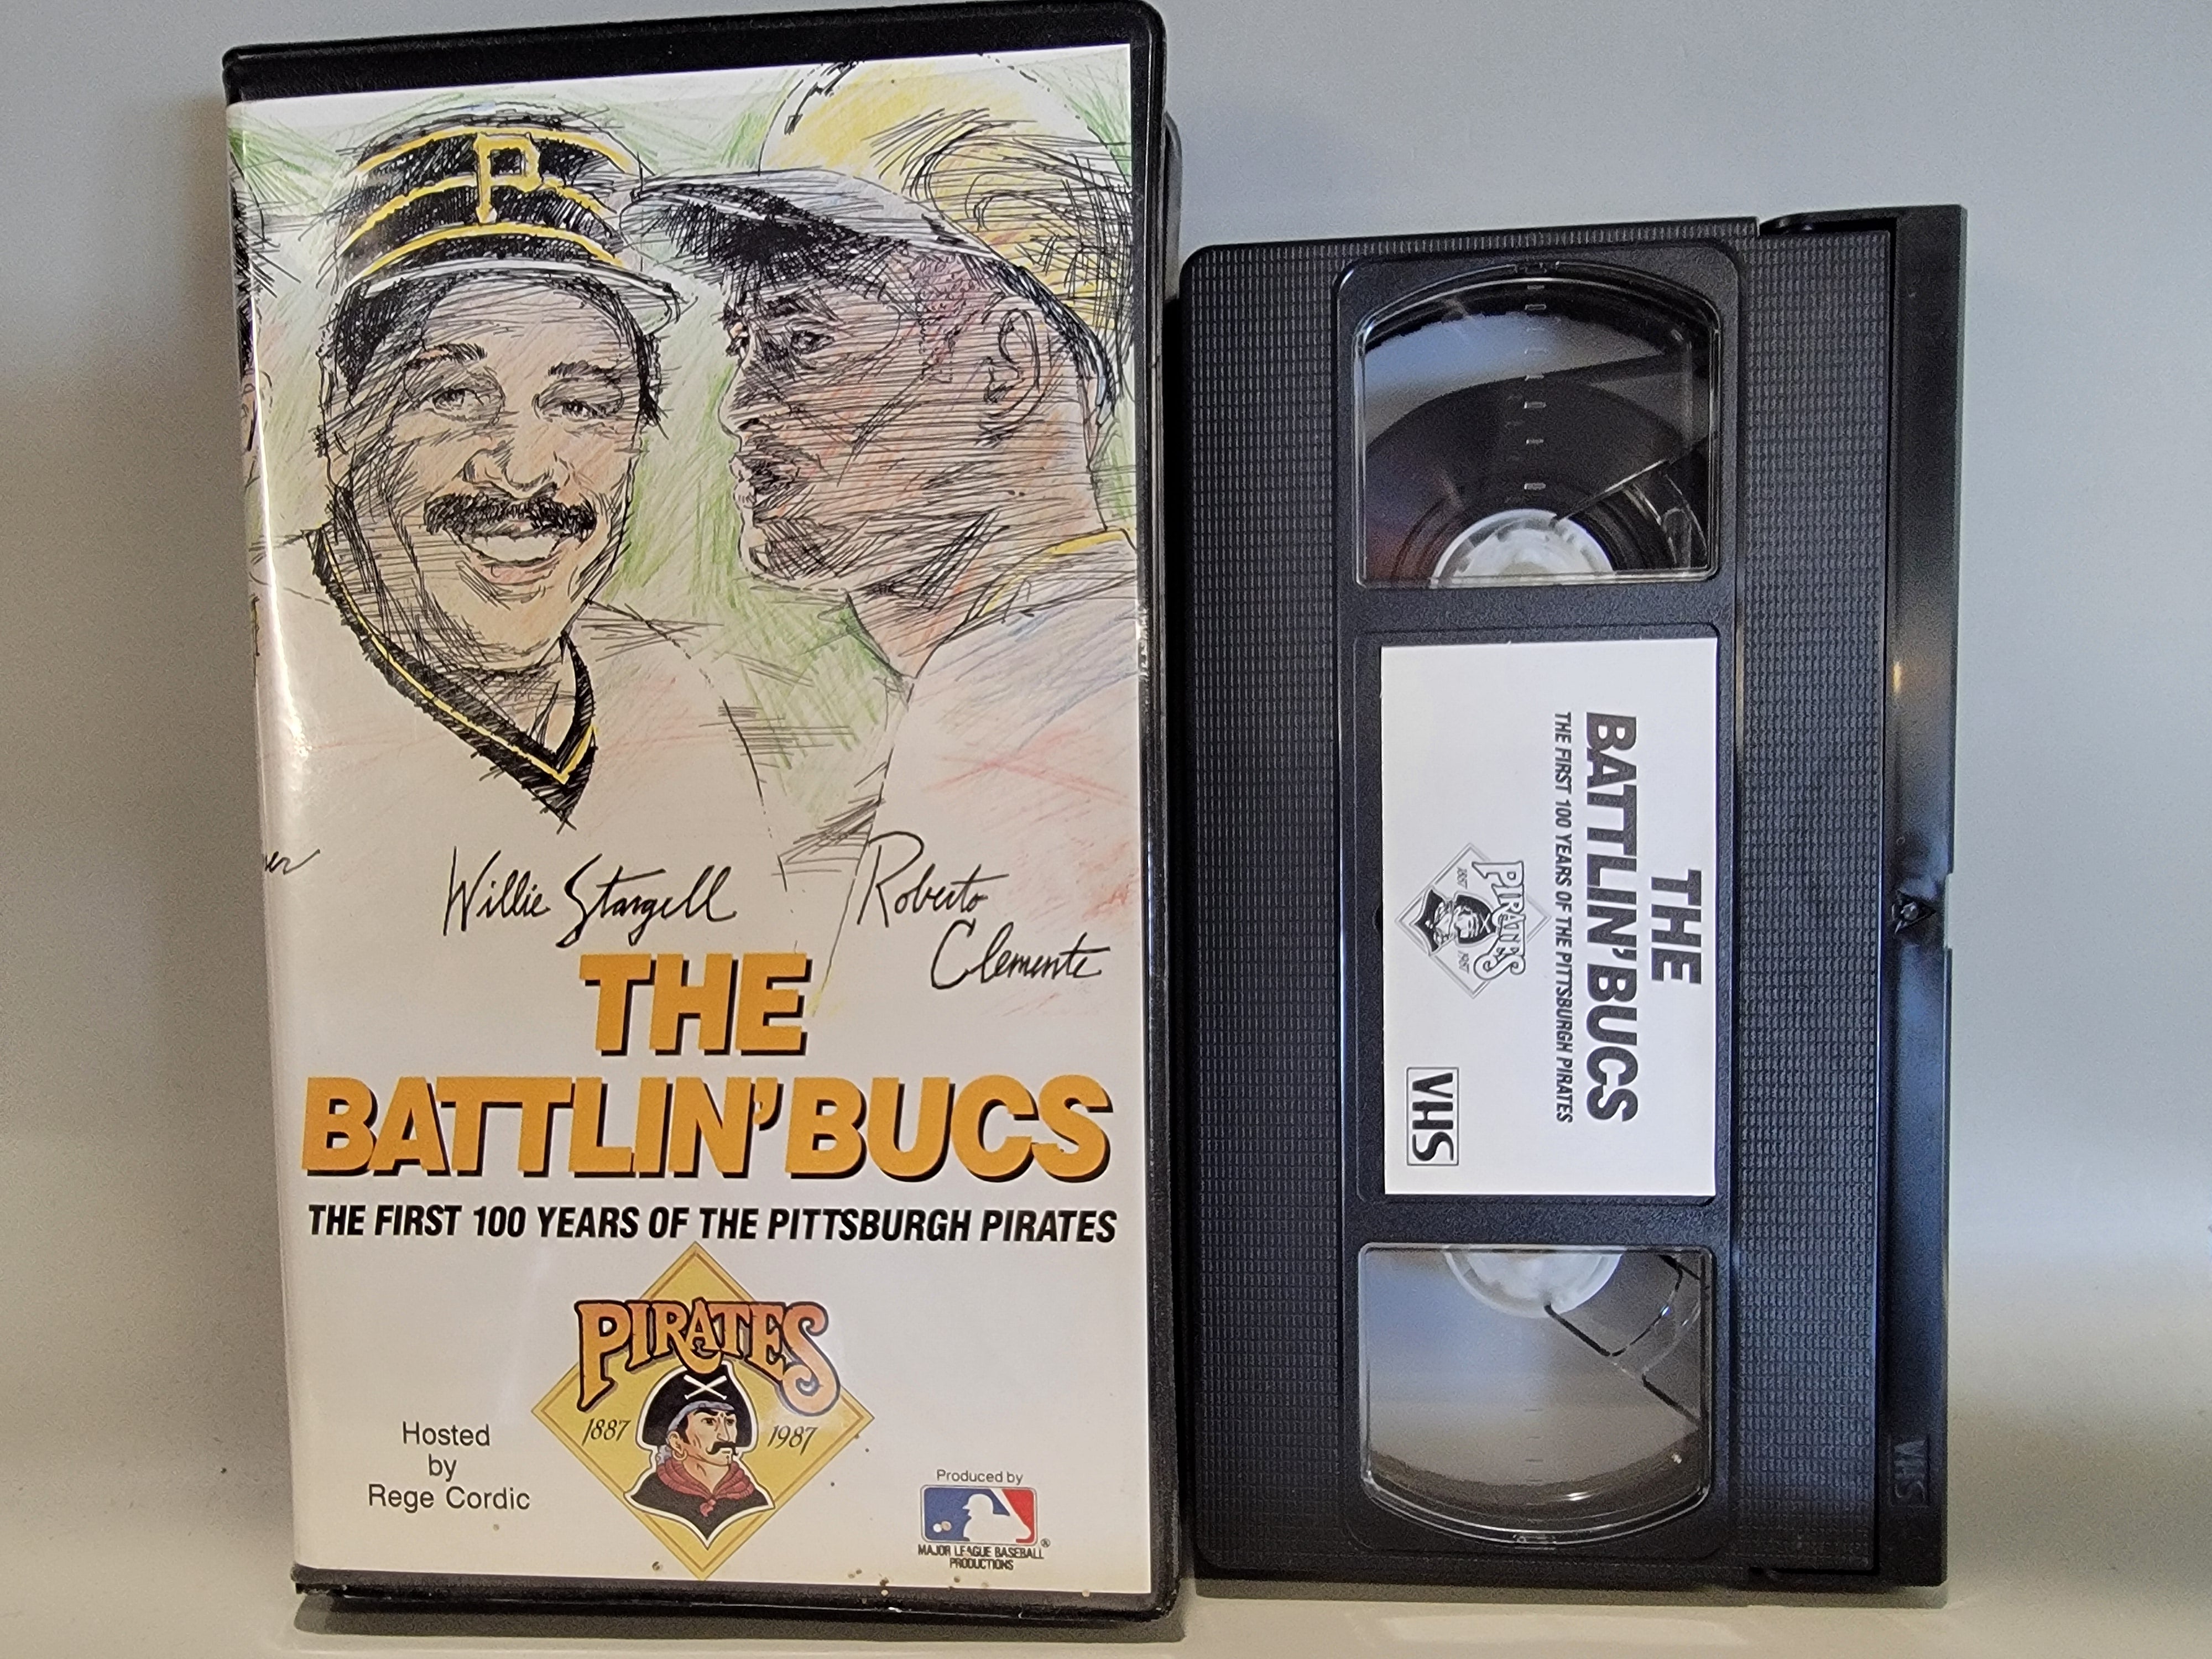 THE BATTLIN' BUCS: THE FIRST 100 YEARS OF THE PITTSBURGH PIRATES VHS [USED]